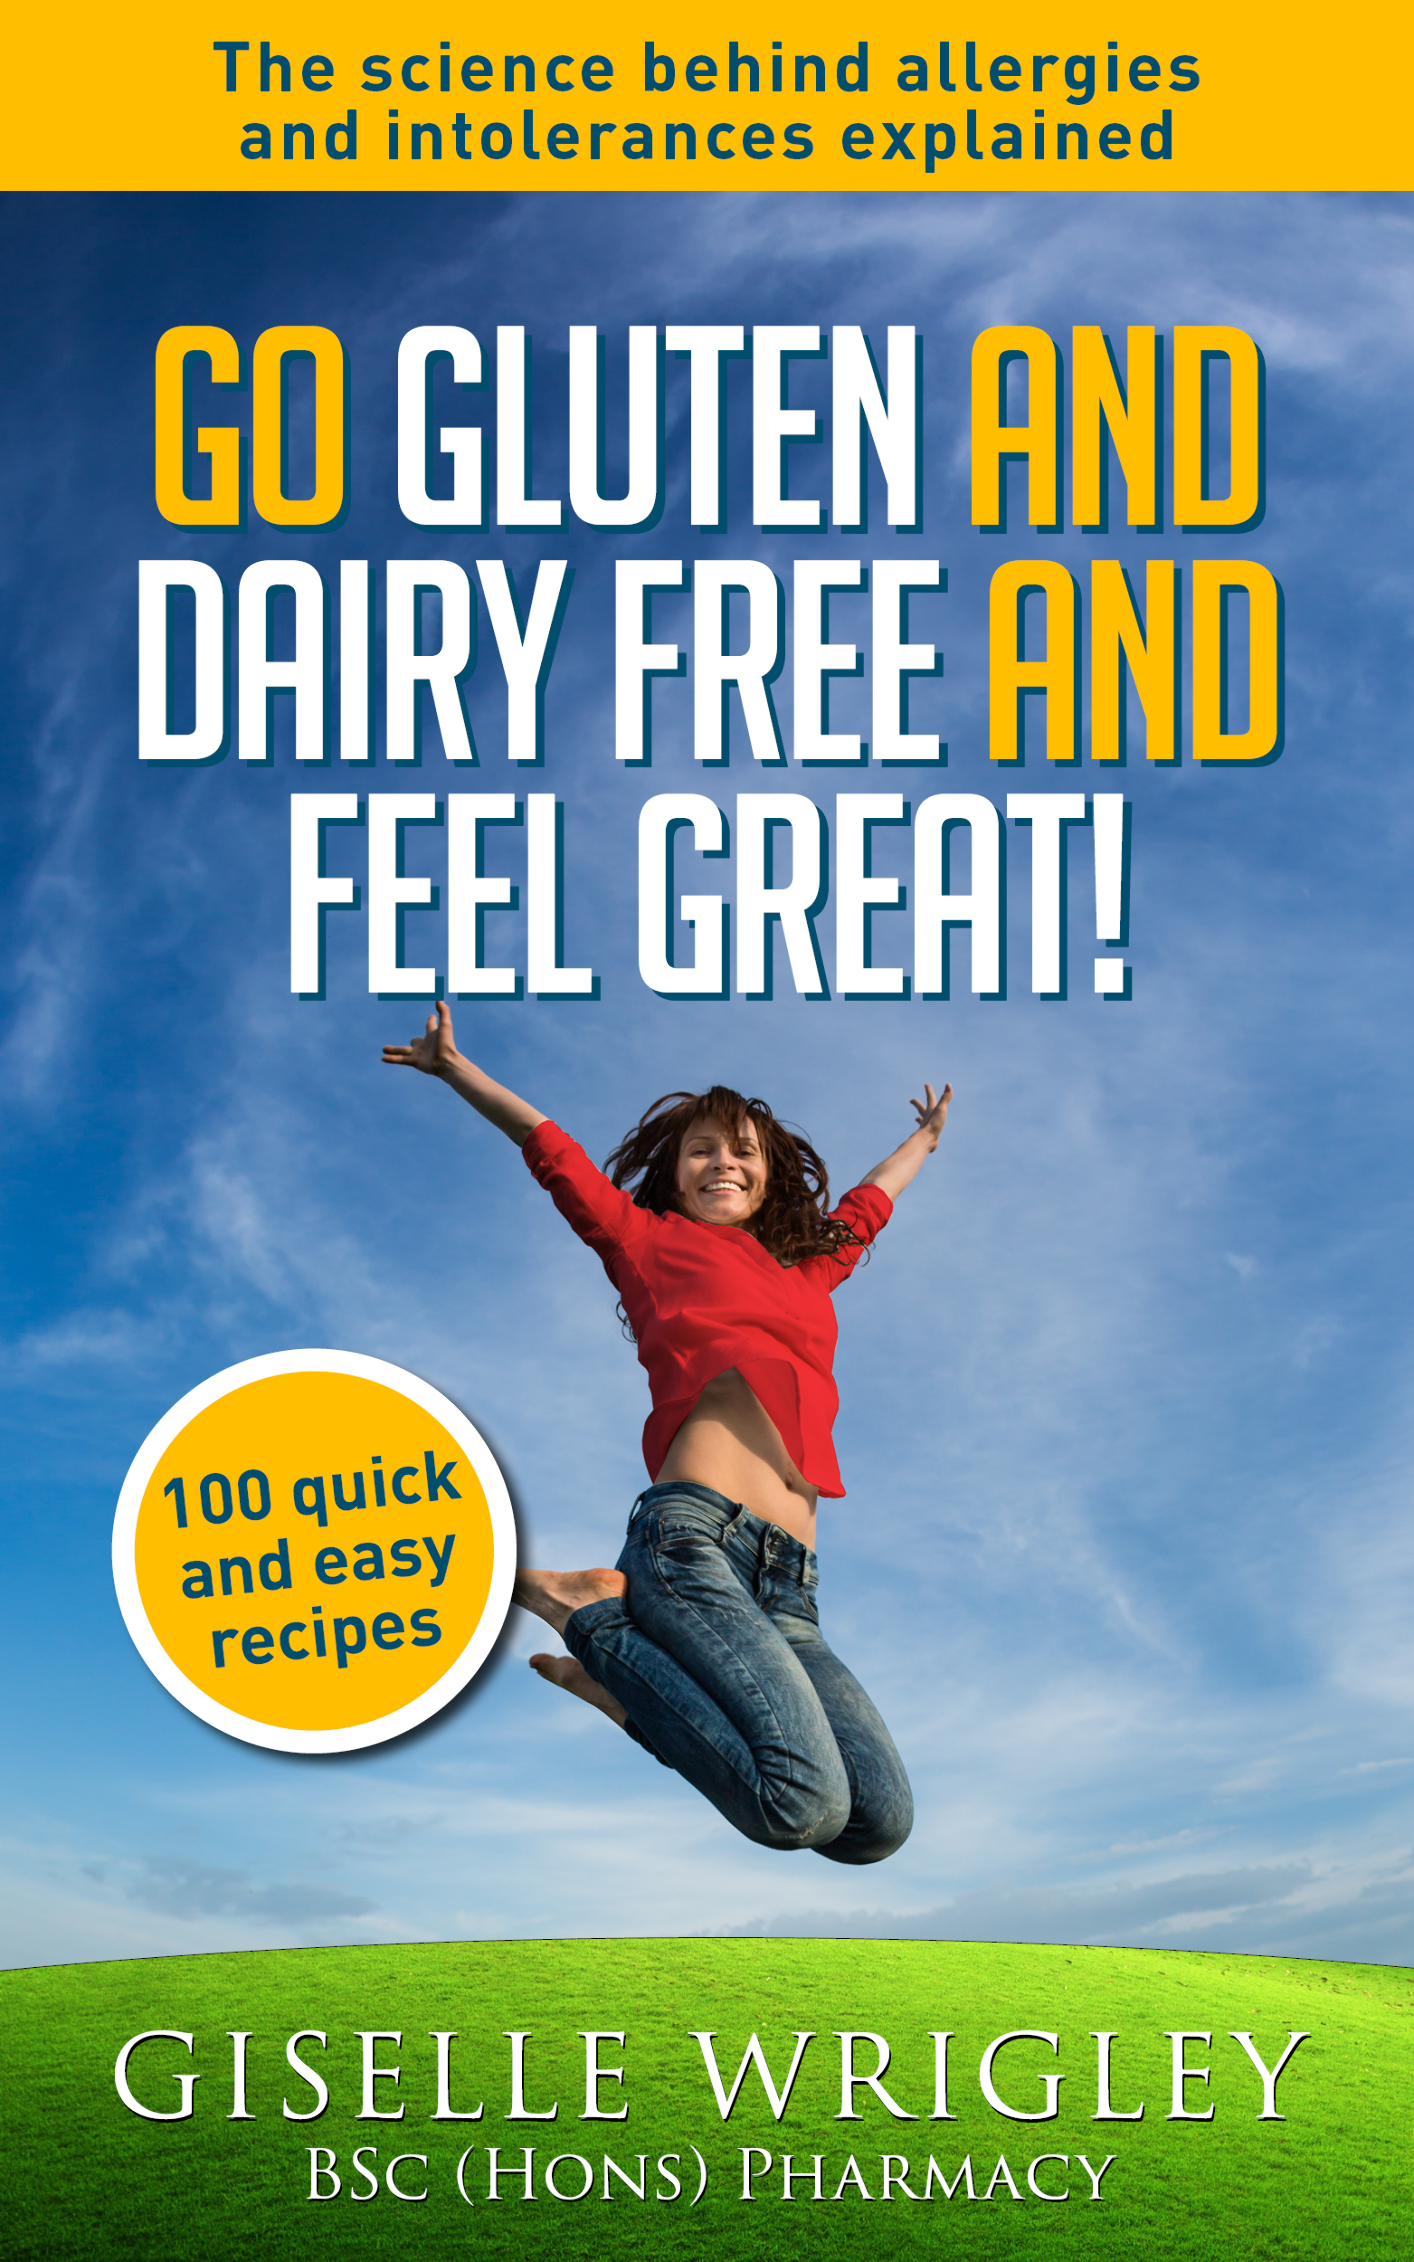 Go GLUTEN and DAIRY FREE and feel GREAT Giselle Wrigley BSc Hons Pharmacy - photo 1